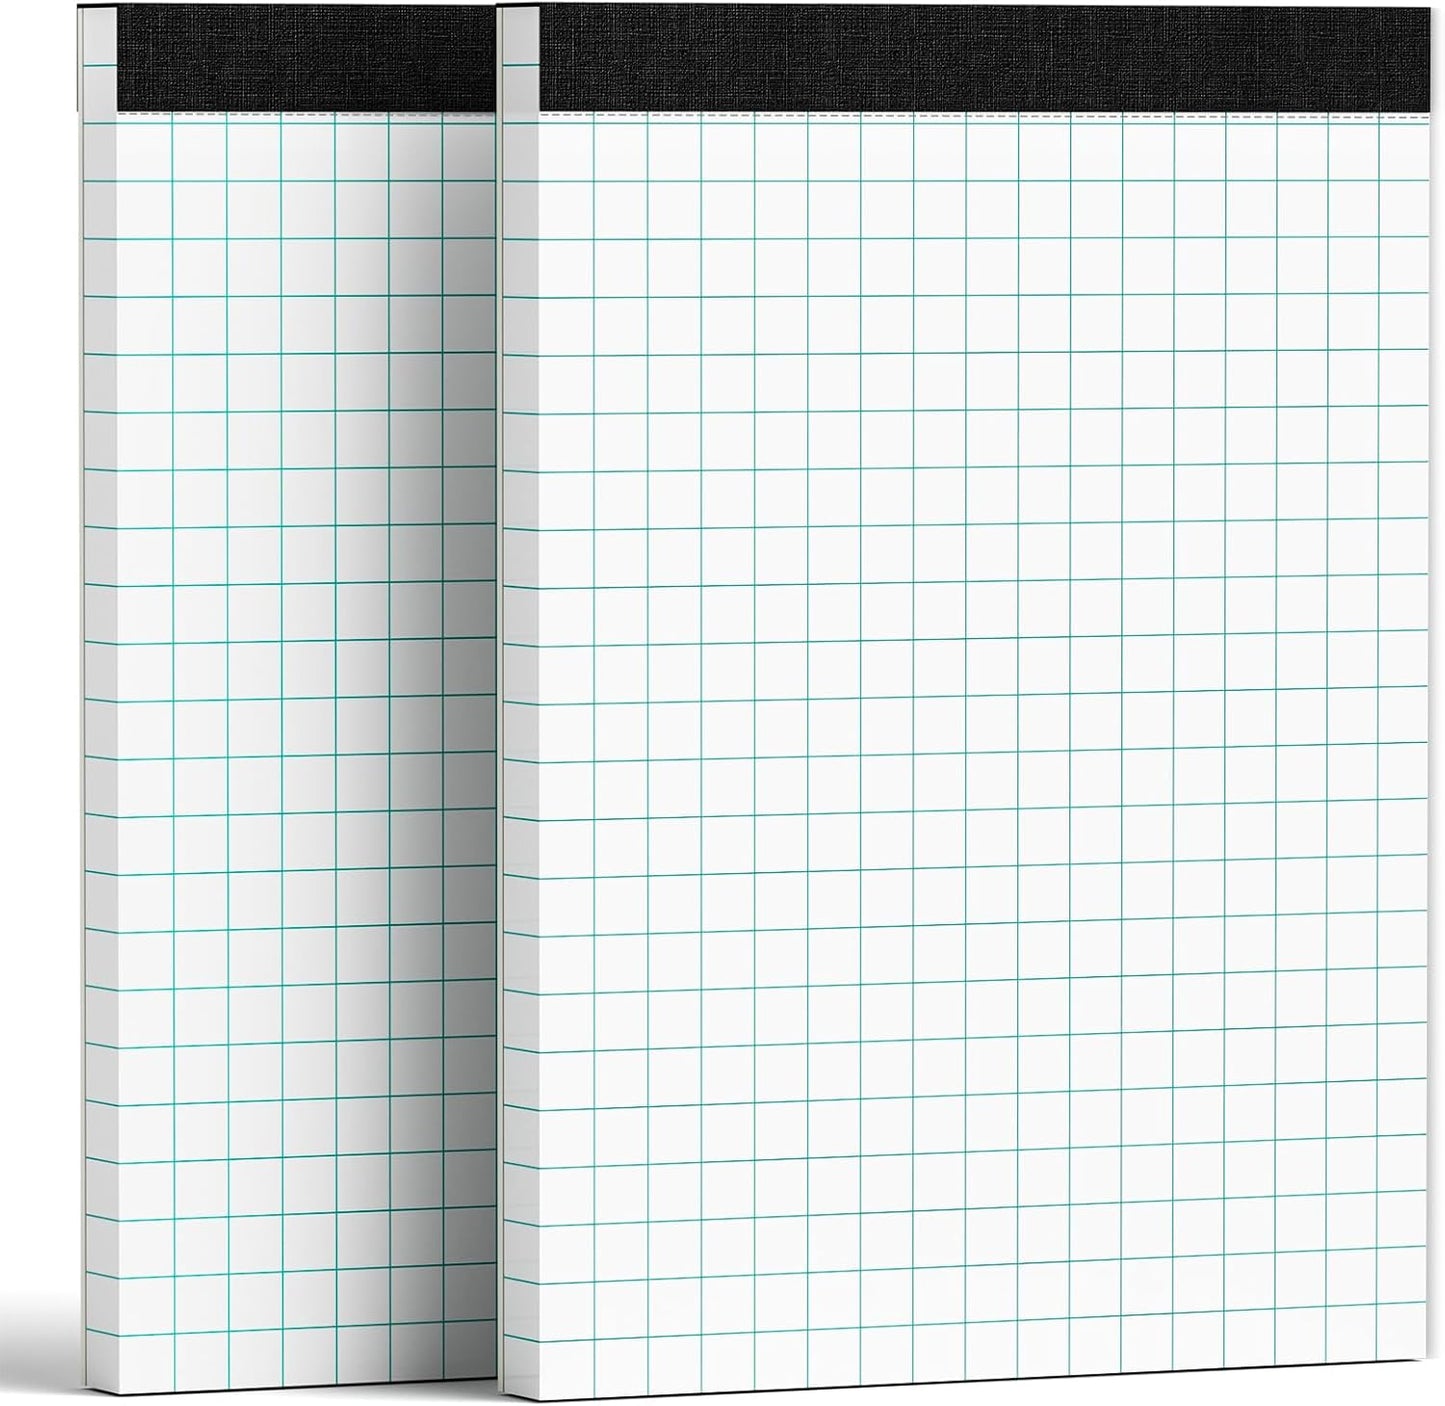 Graph Paper Pads 8.5 X 11 Grid Paper Notebook 2 Pack White 2X2 Graph Ruled Grid Paper Pads 8-1/2 X 11 Blueprint Quadrille Pad 8.5 X 11 Grid Notebook Paper 8.5 X 11 Graft Paper Graph Pads 50 Sheets/Pad